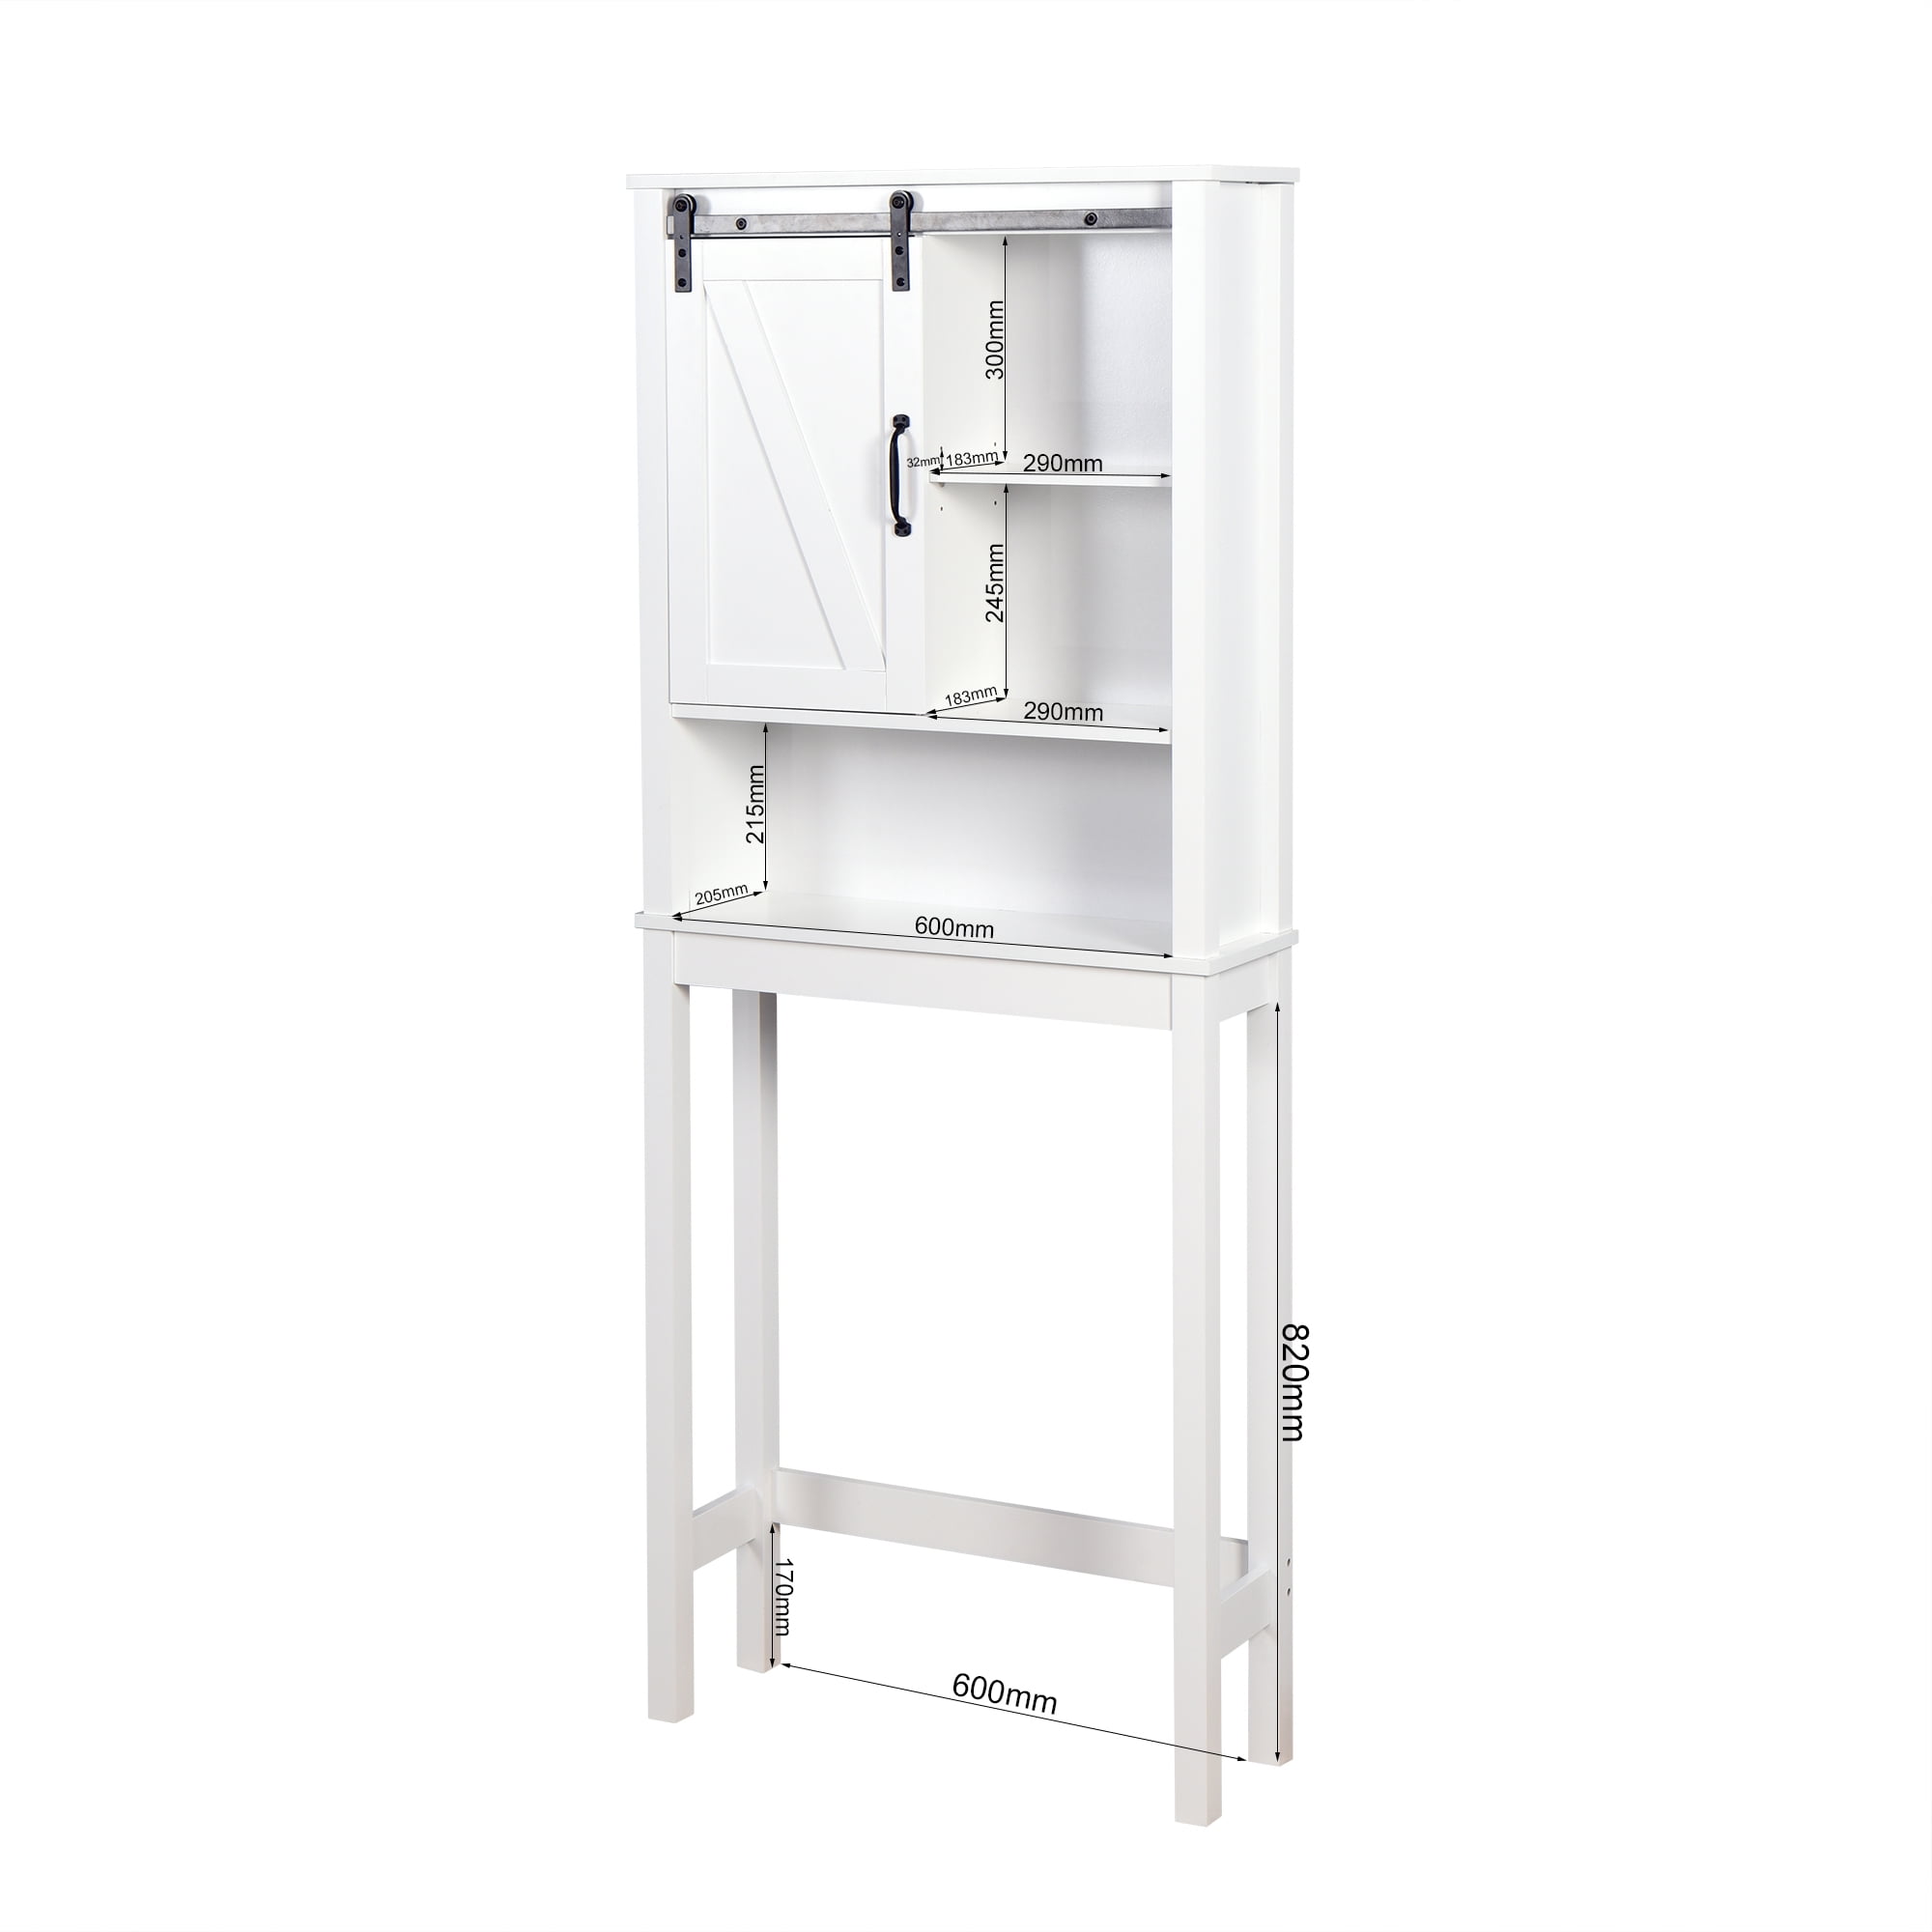  Toilet Side Cabinet Bathroom Crevice Shelf Toilet Crevice  Storage Drawer Type Rack, Multi-Layer Bathroom Floor Cabinet with Wheels,  Mobile Shelving Unit Organizer for Small Spaces : Home & Kitchen